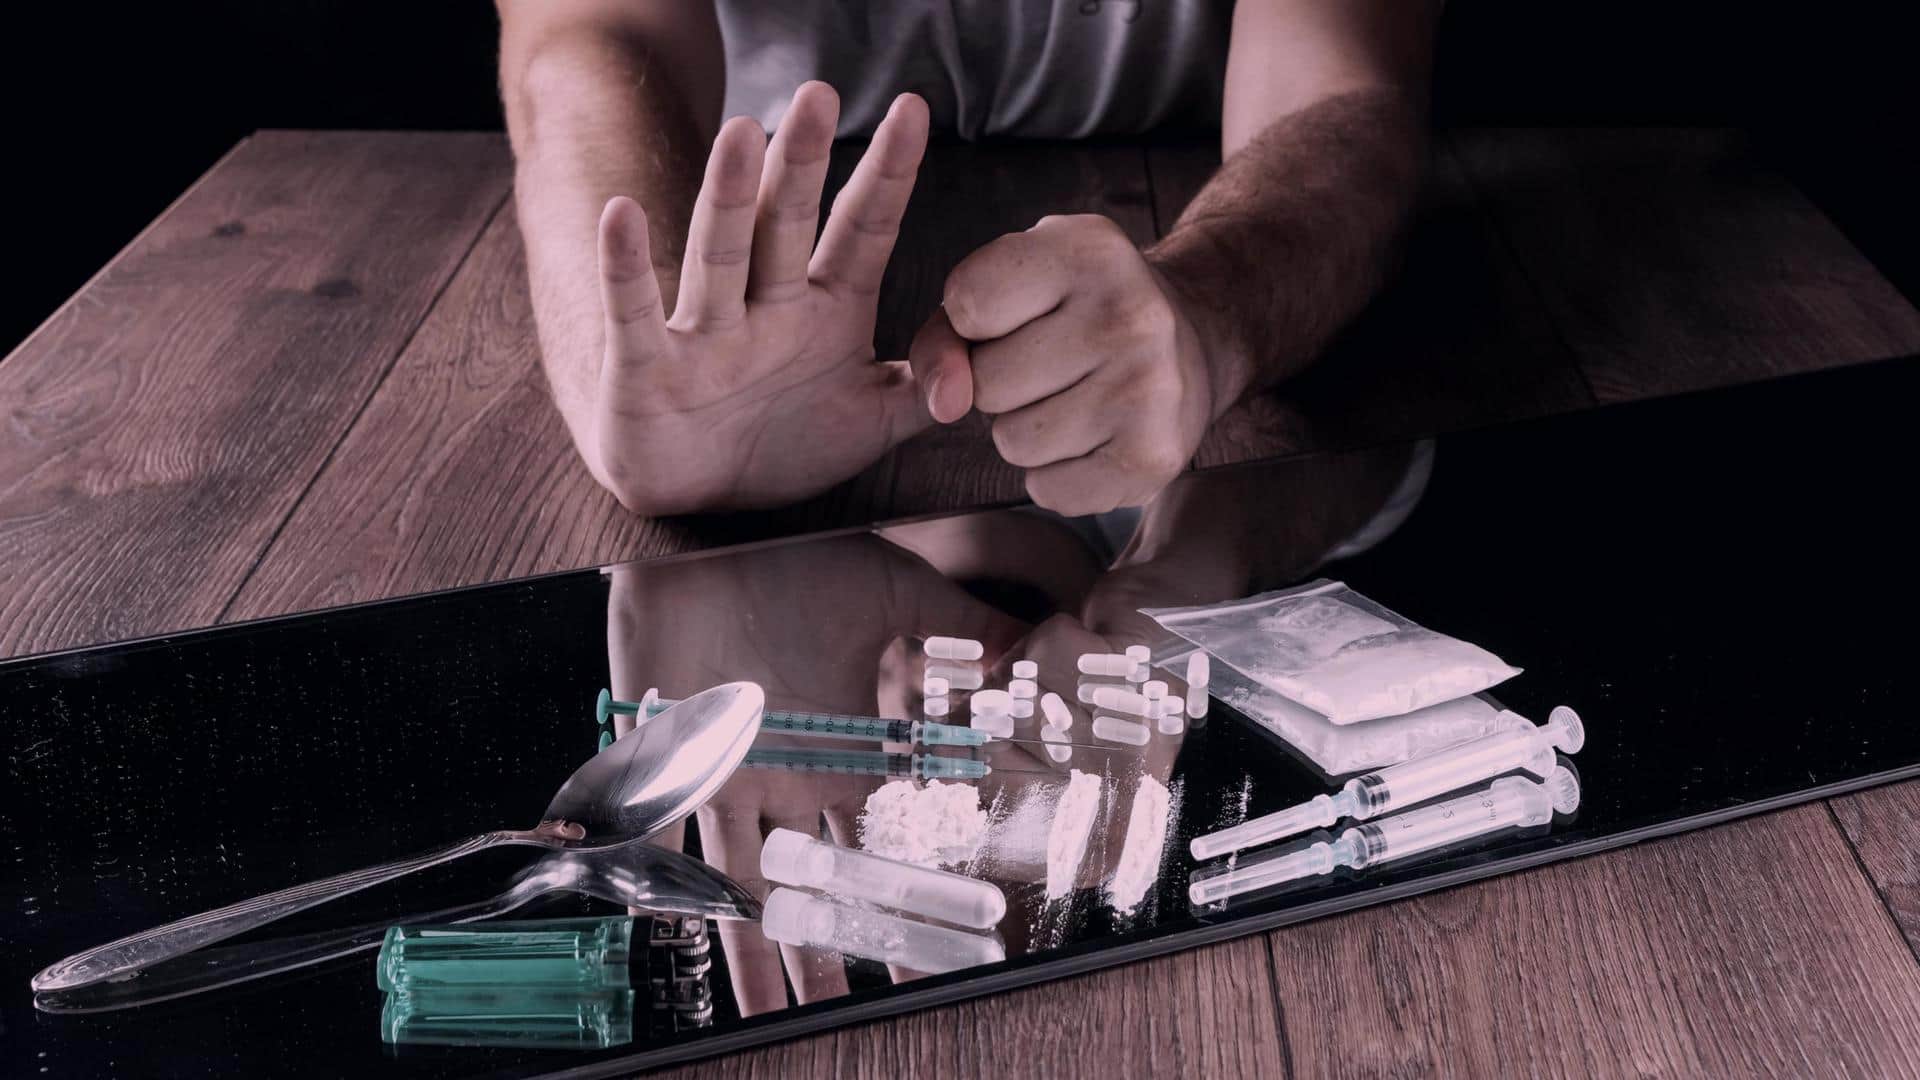 World Drug Day: Tips for helping someone with an addiction